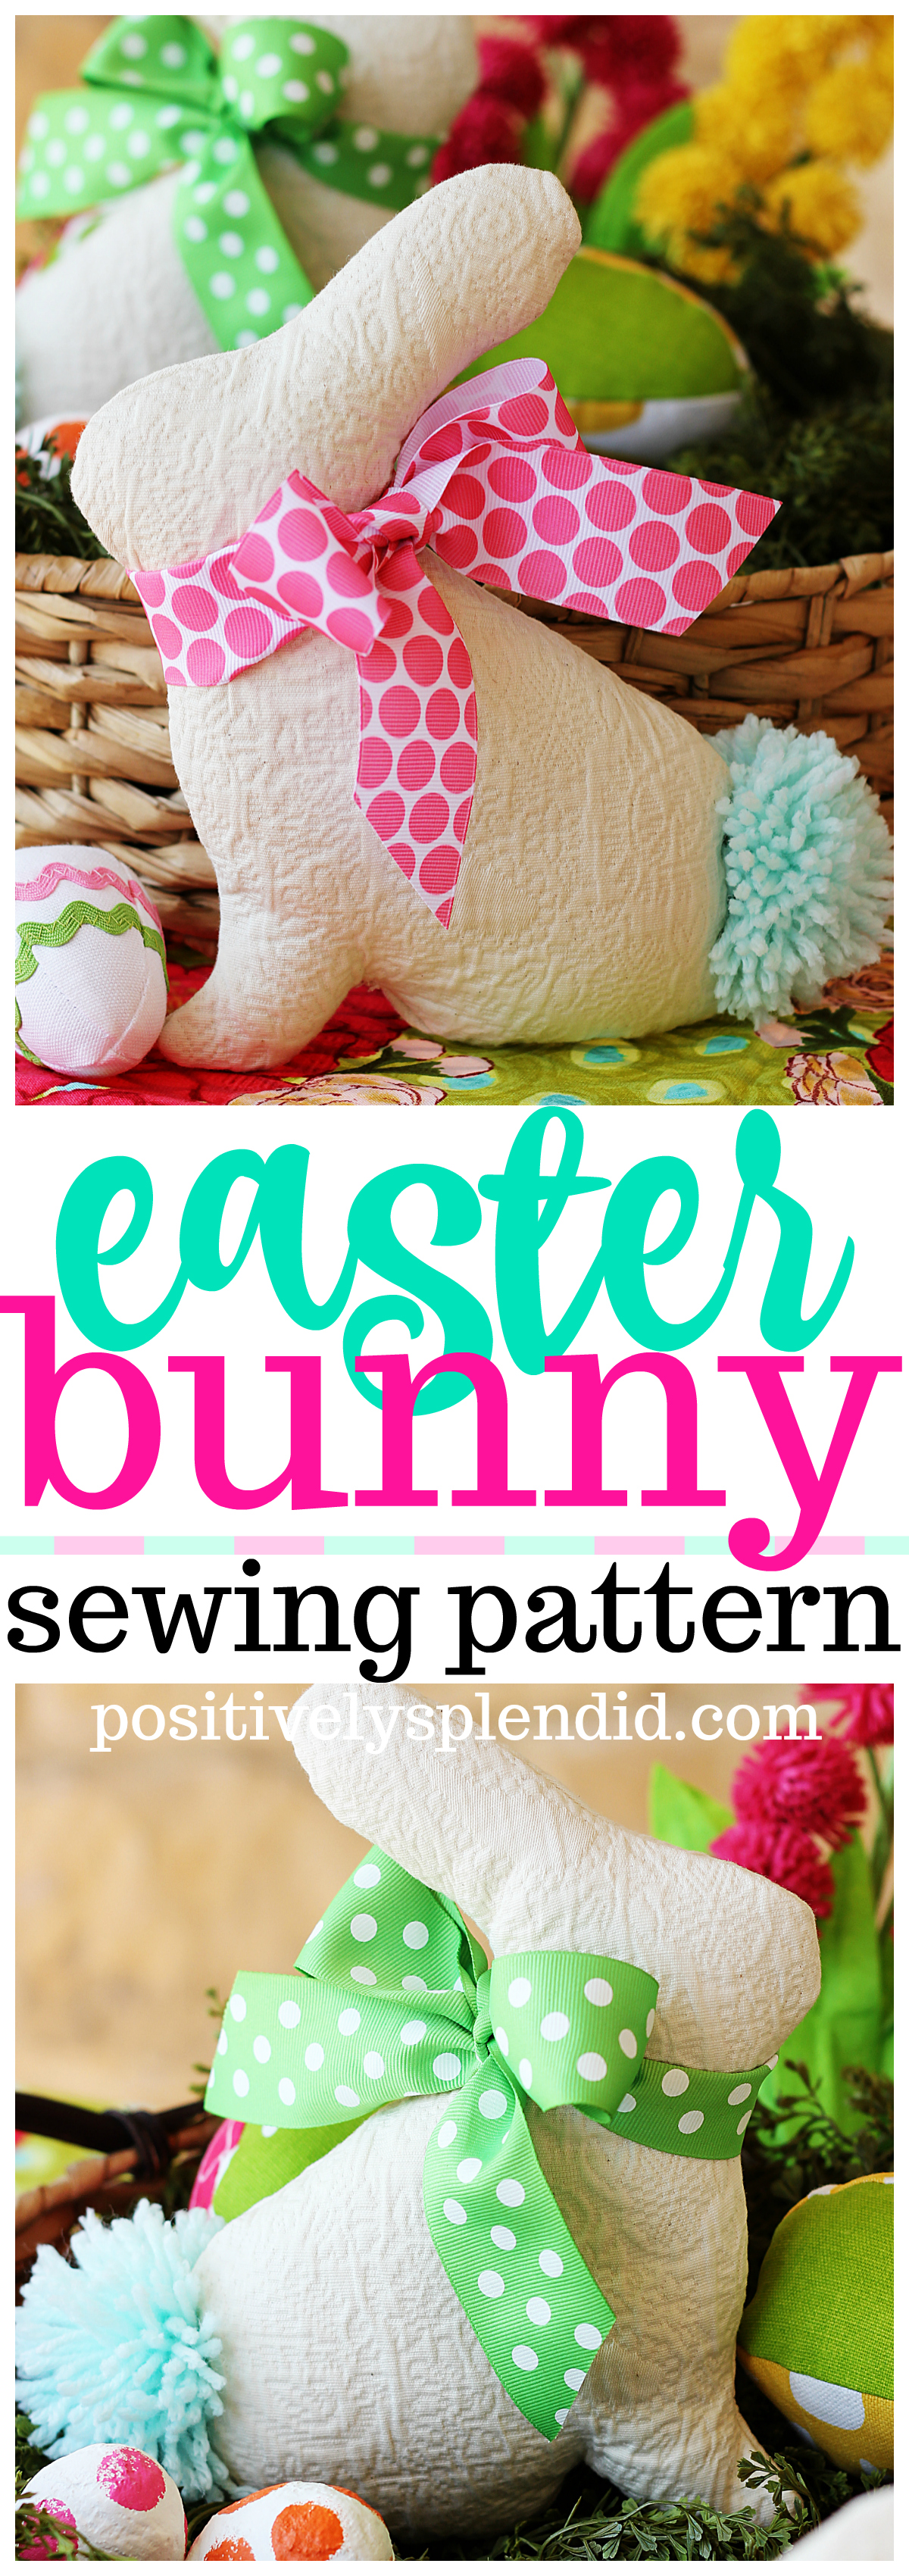 Stuffed Easter Bunny Sewing Pattern - Adorable Easter sewing project!